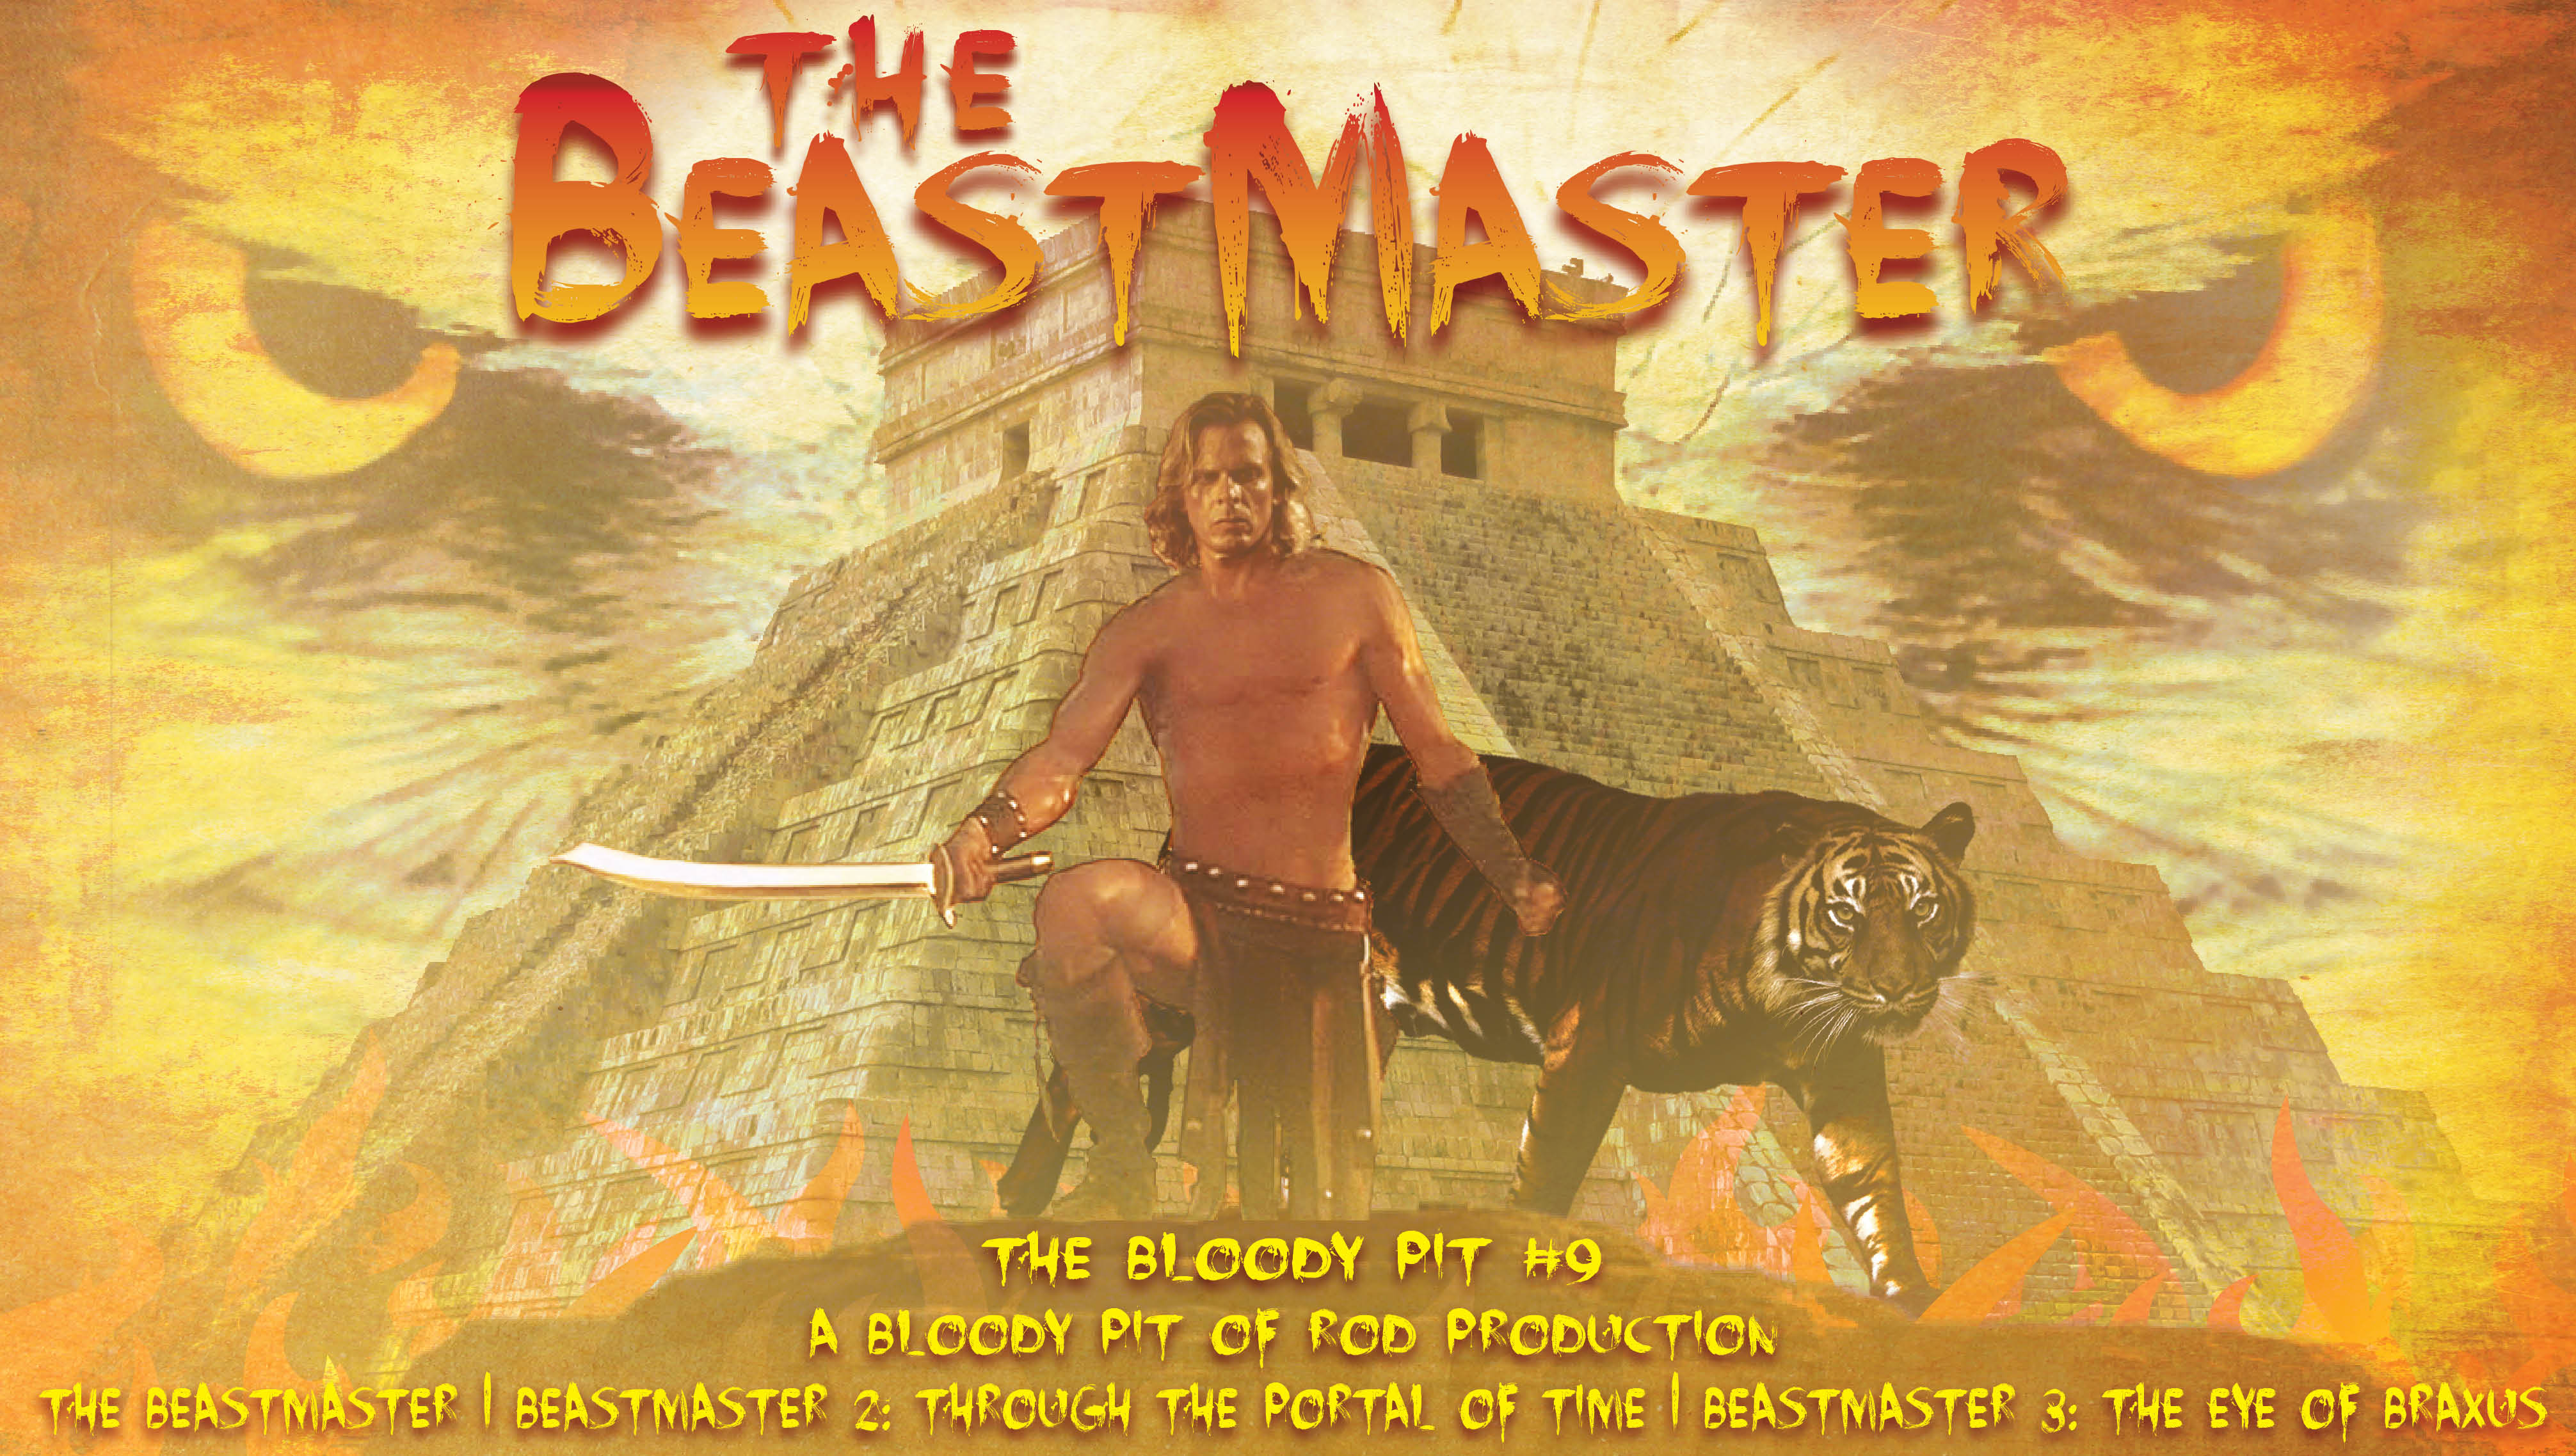 The Bloody Pit #9 - THE BEASTMASTER TRILOGY.